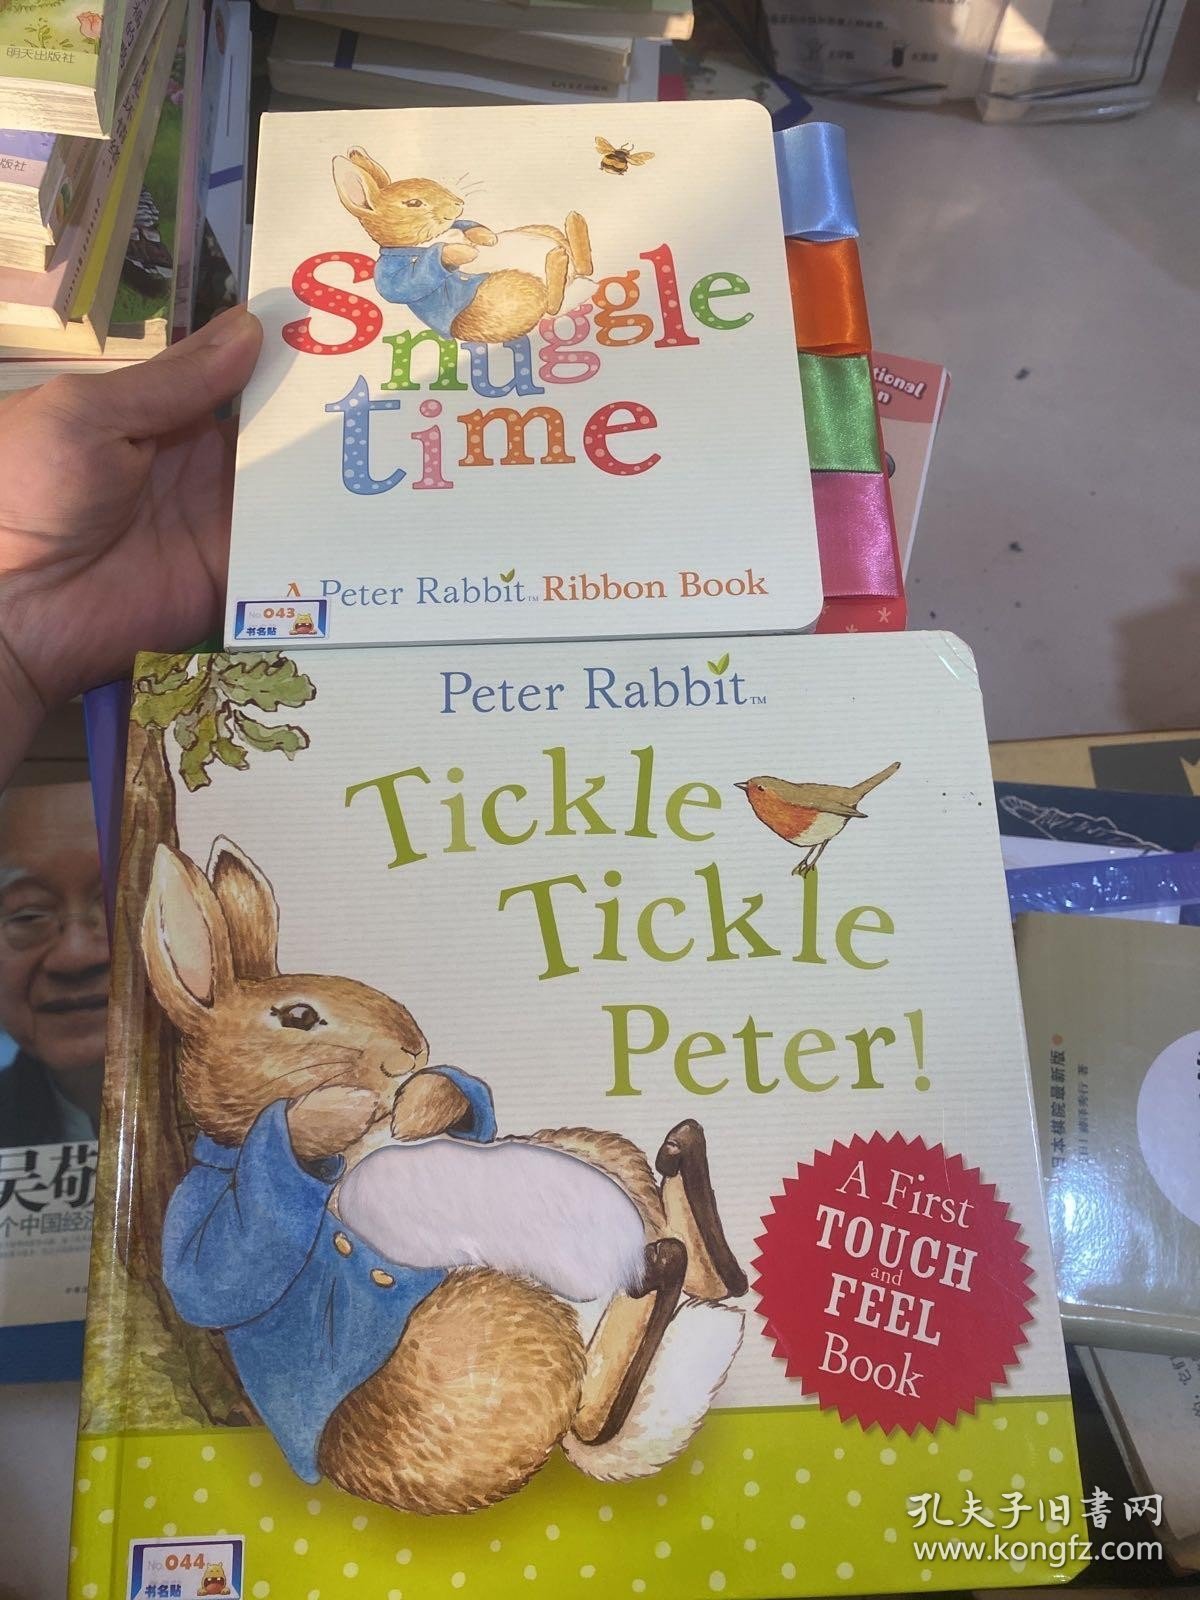 Peter Rabbit: Tickle Tickle Peter! Snuggle Time: A Peter Rabbit Ribbon Book